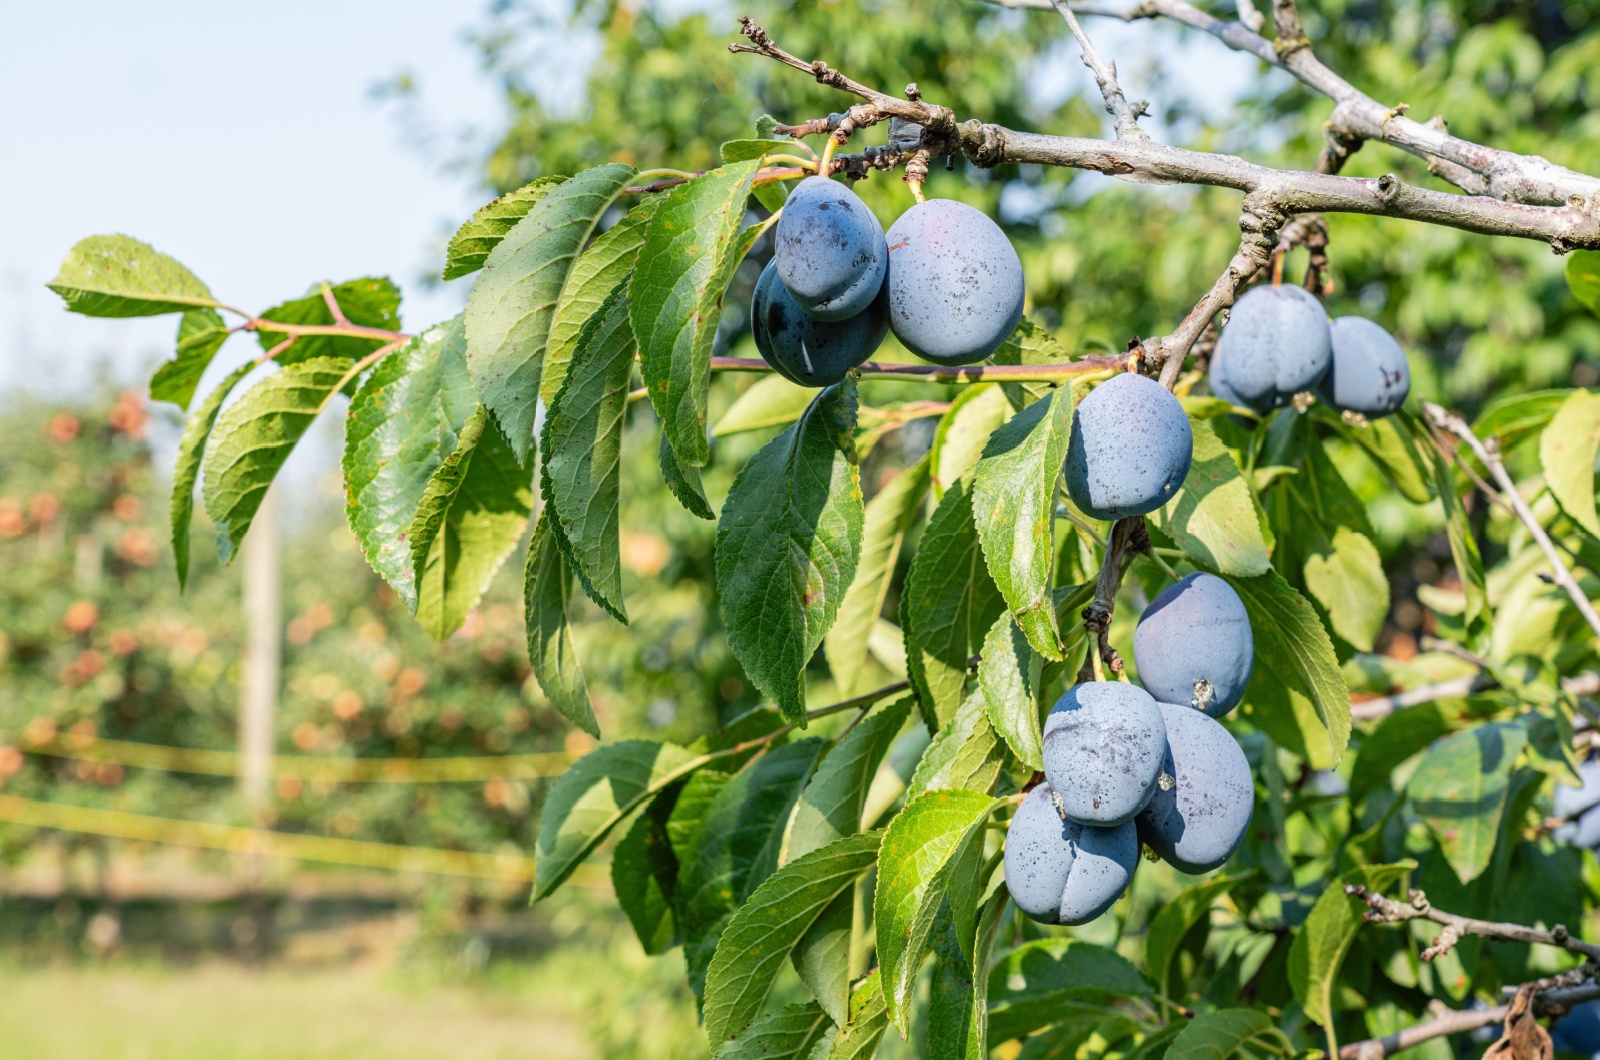 Ripe plums hanging from tree branch